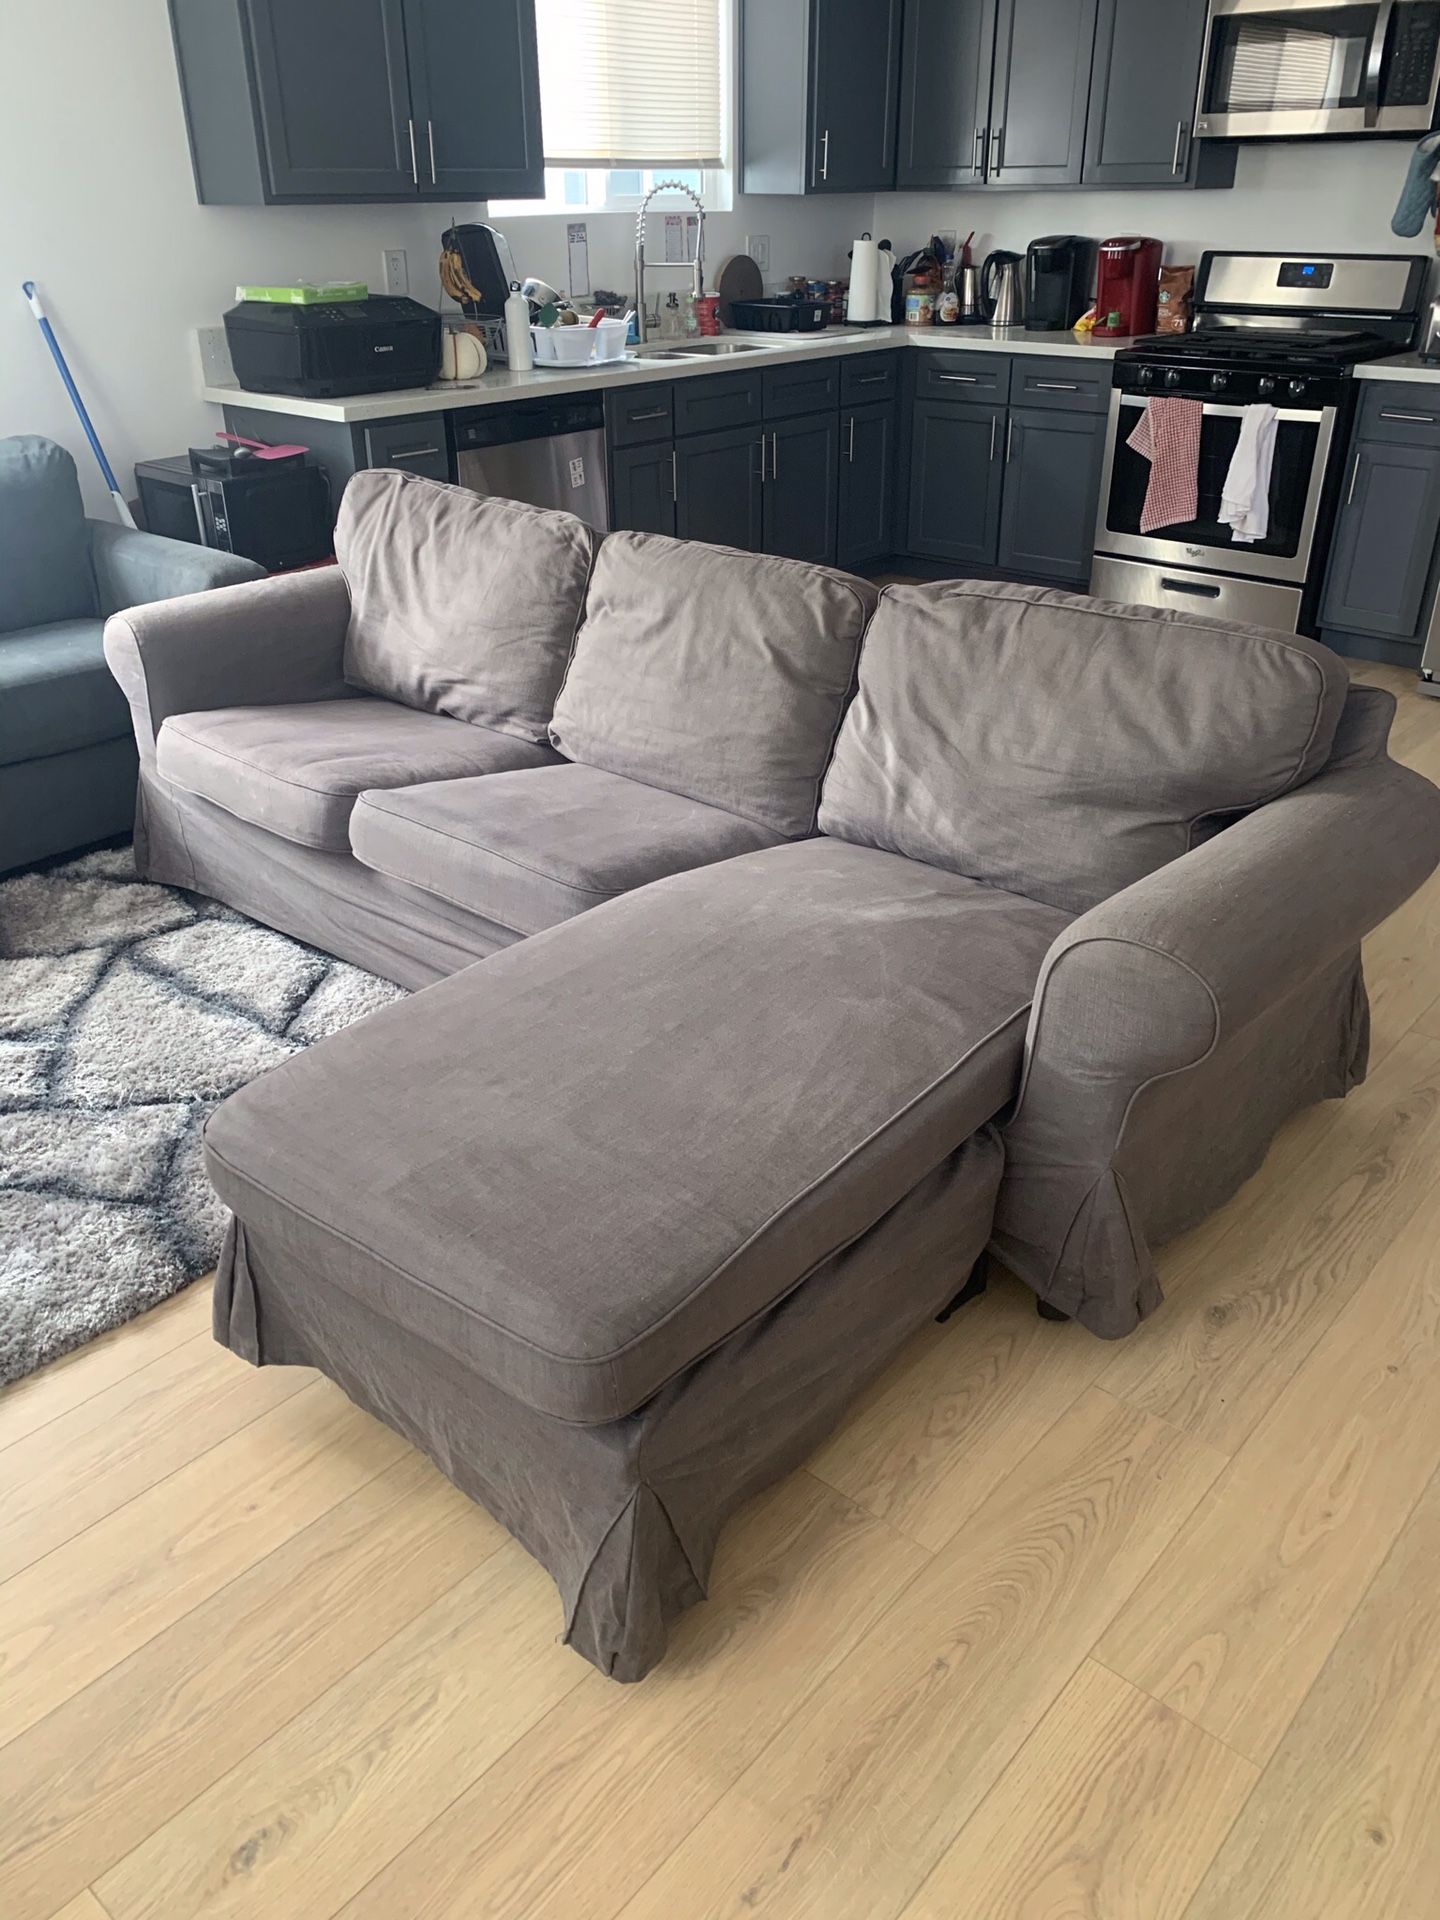 Comfy Gray Sectional Couch For Sale